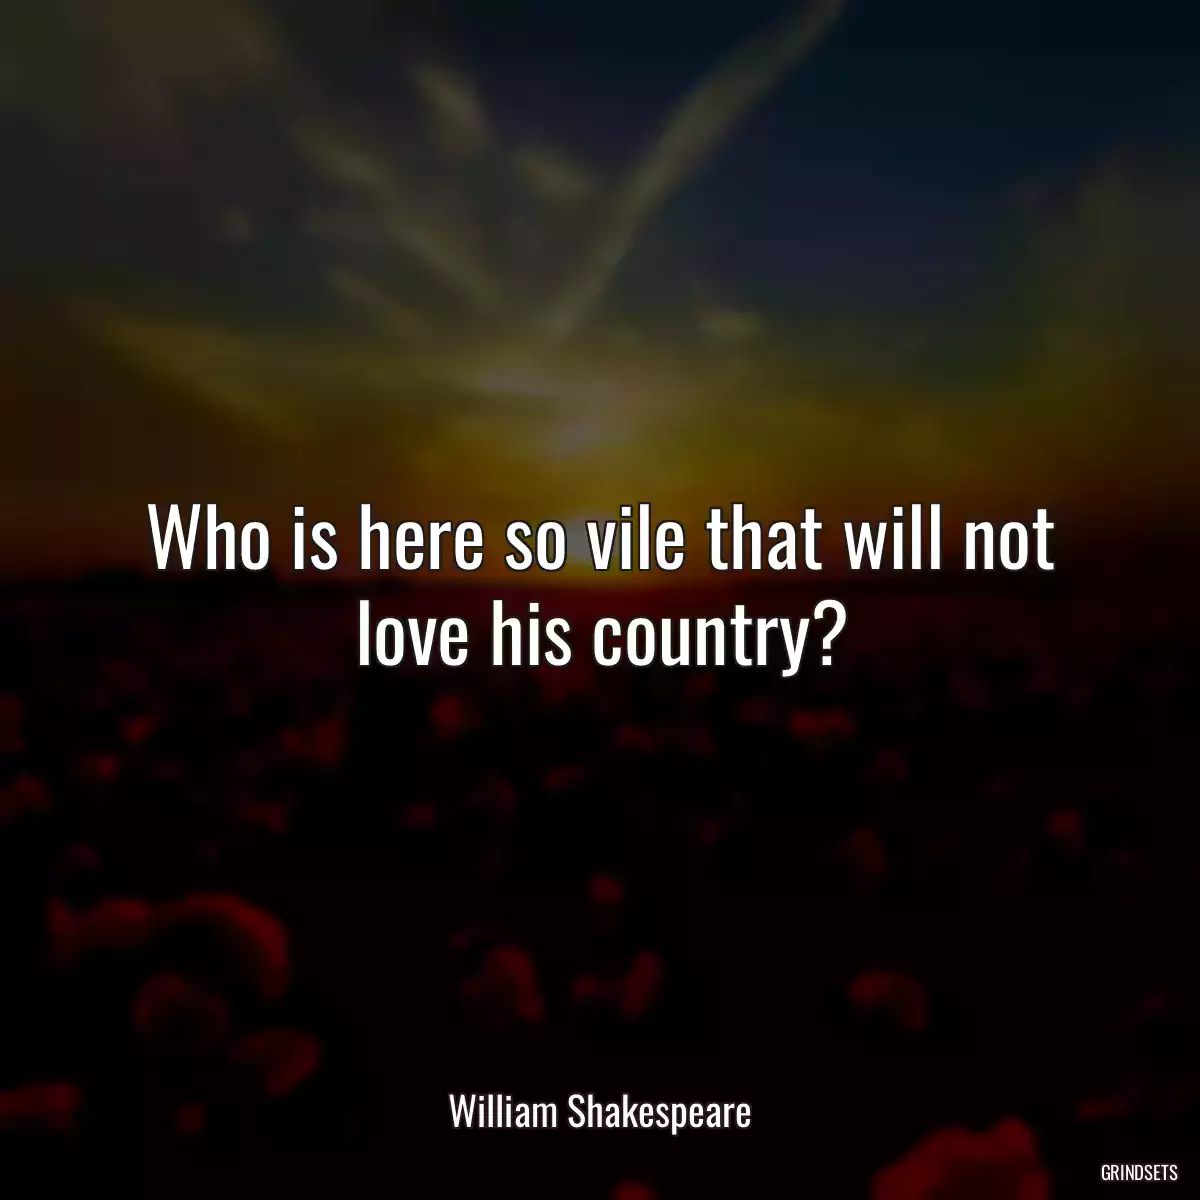 Who is here so vile that will not love his country?